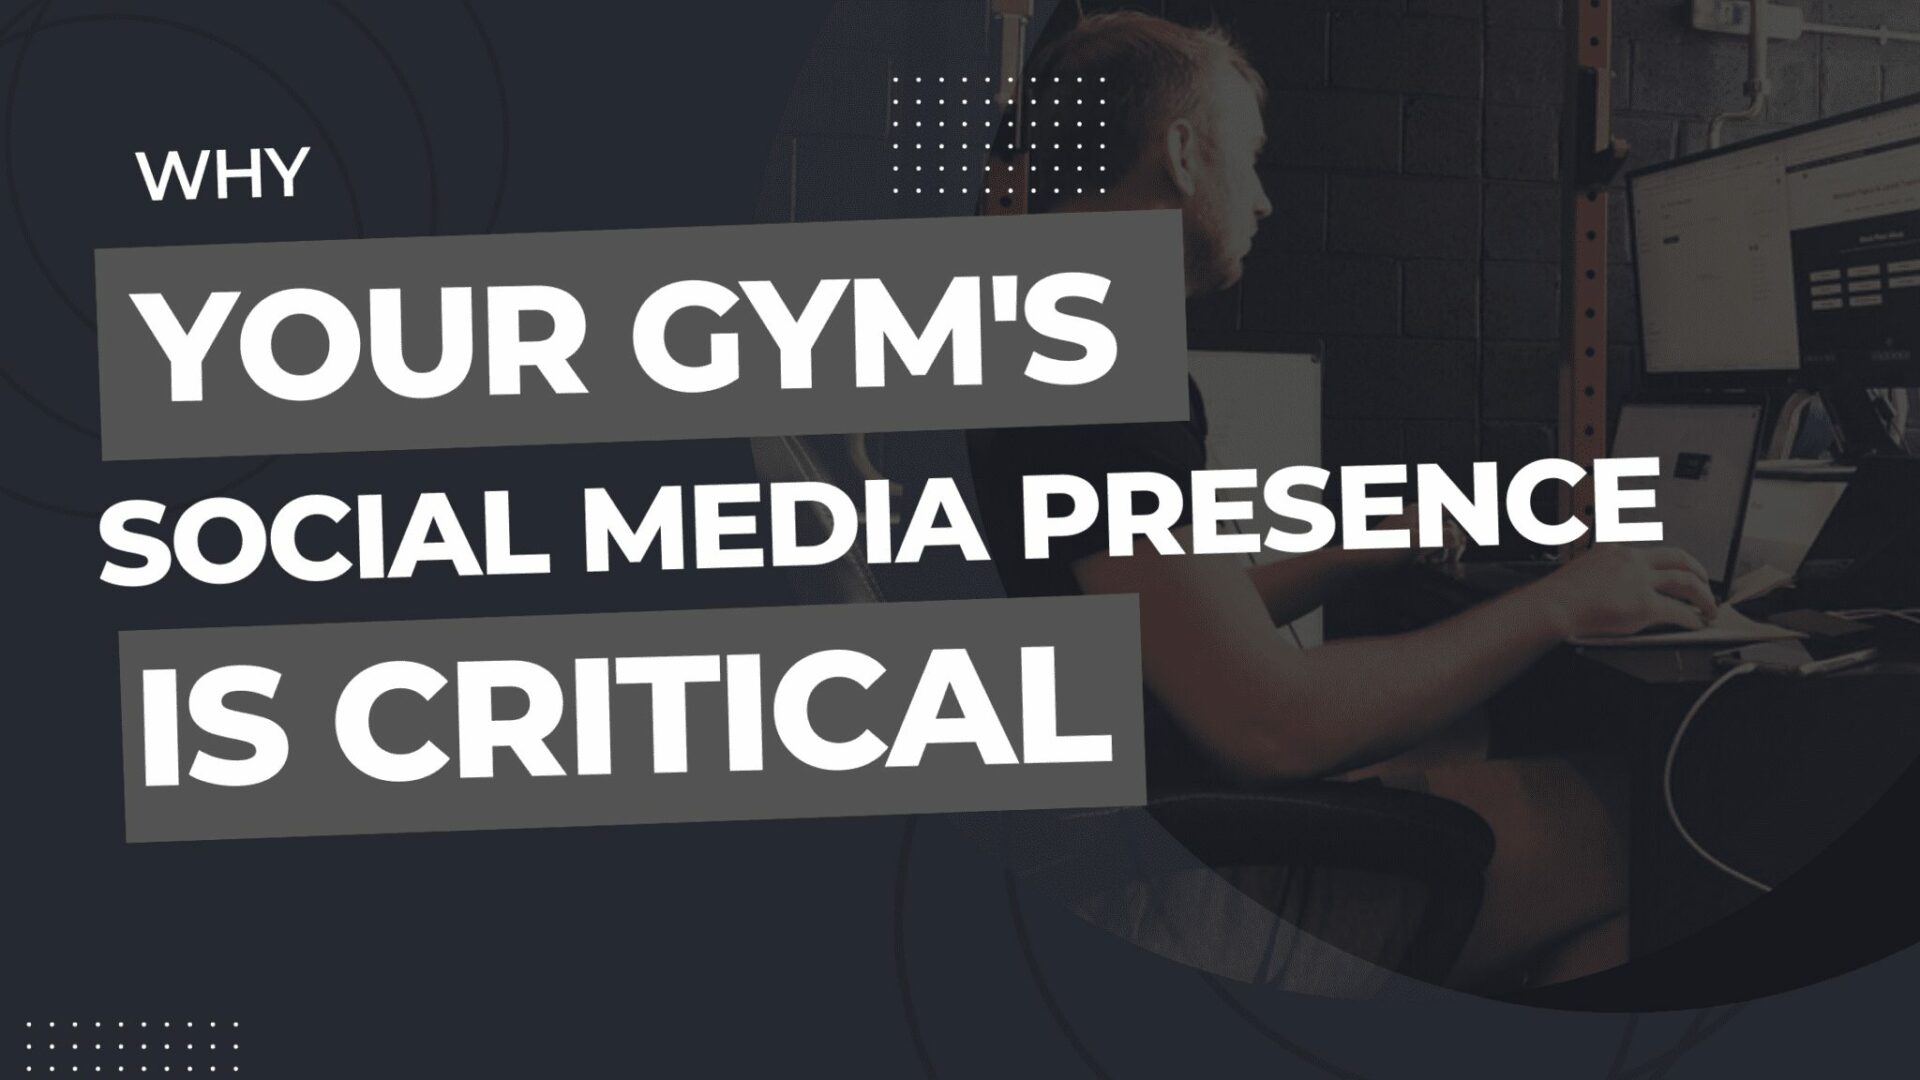 Why your gym’s social media presence is critical